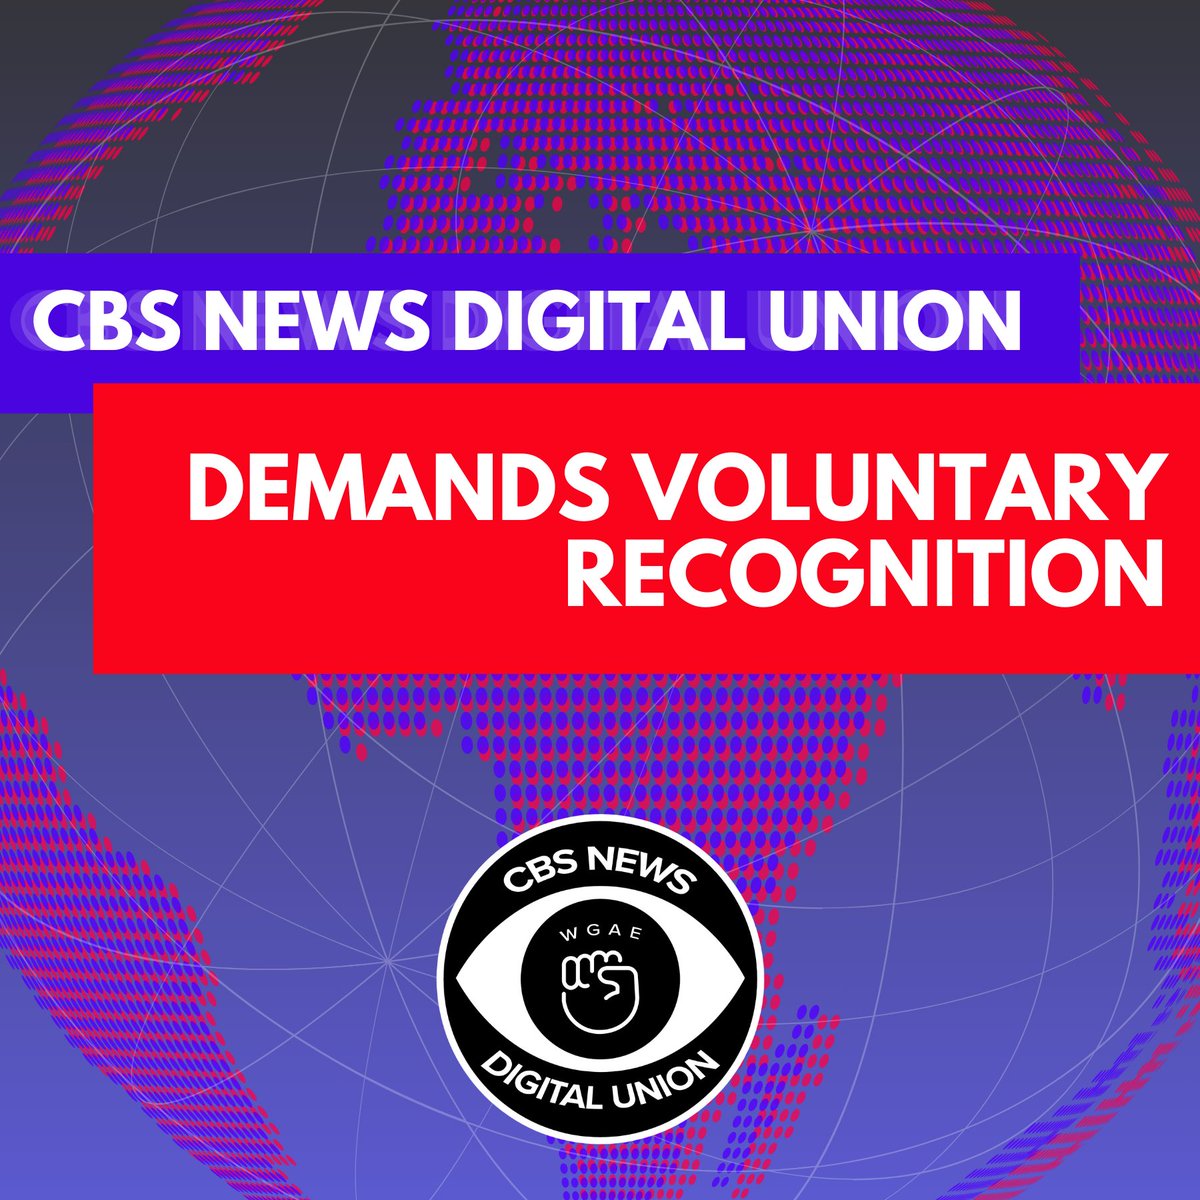 Writers and editors at CBS News Digital have unionized with the WGAE! ✊ CBS News Digital's 46-member bargaining unit is calling on @CBSNews management to voluntarily recognize their union, without delay or division.